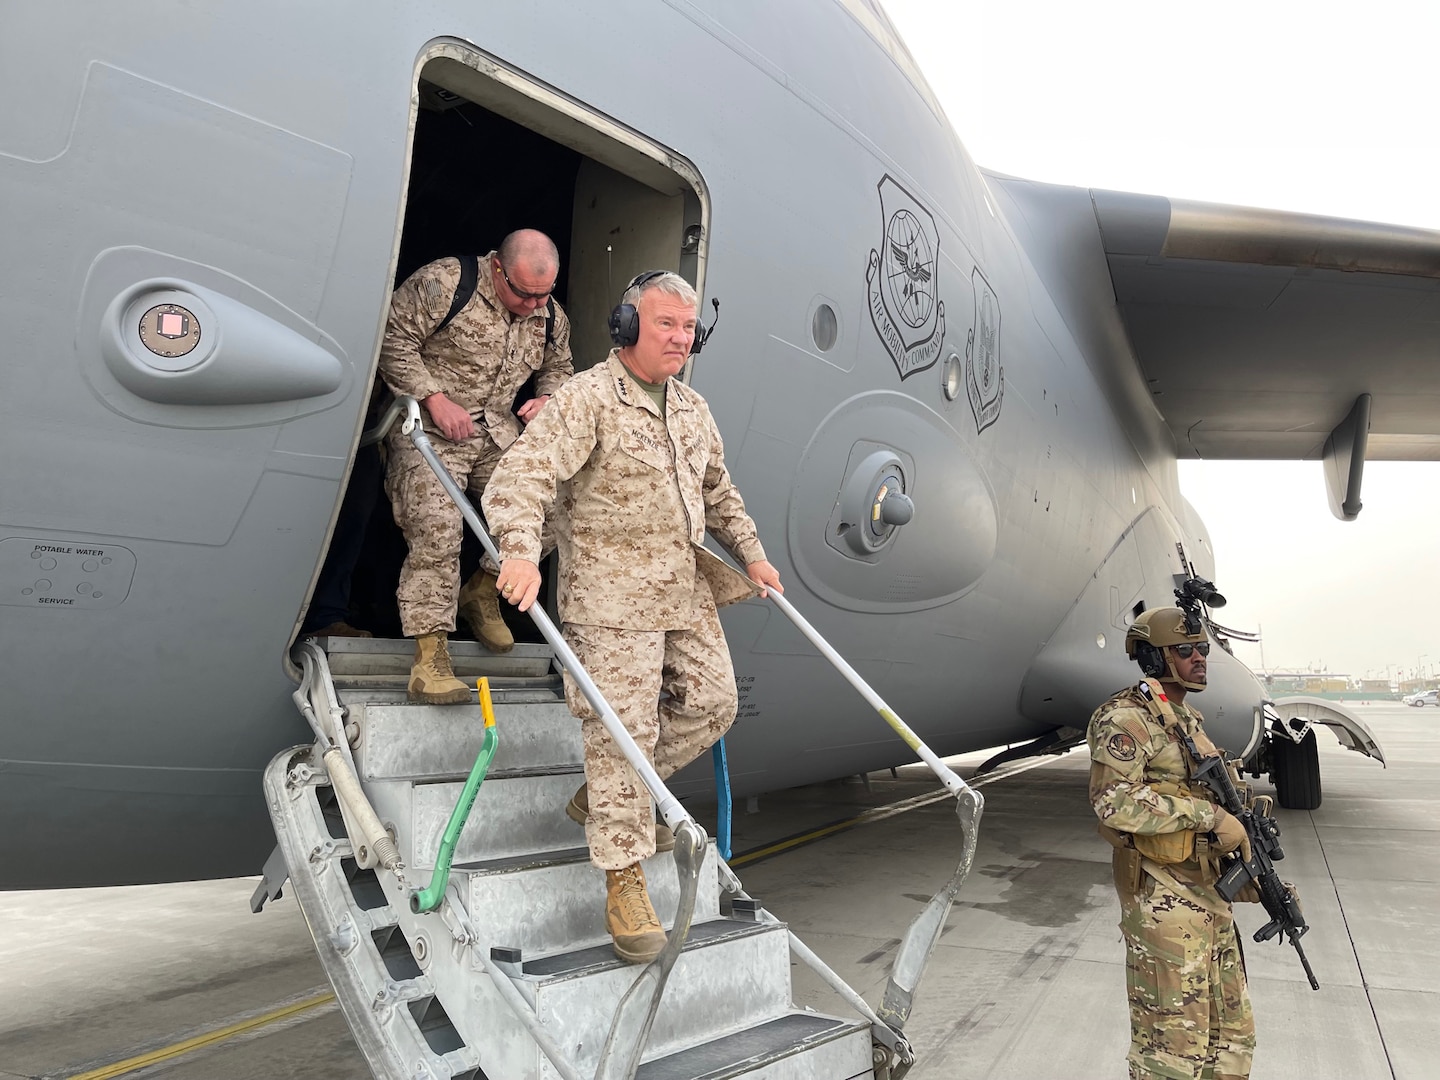 U.S. Marine Corps Gen. Frank McKenzie, the commander of U.S. Central Command, arrives at Hamid Karzai International Airport, Afghanistan on August 17, 2021. (U.S. Navy photo by Capt. William Urban)